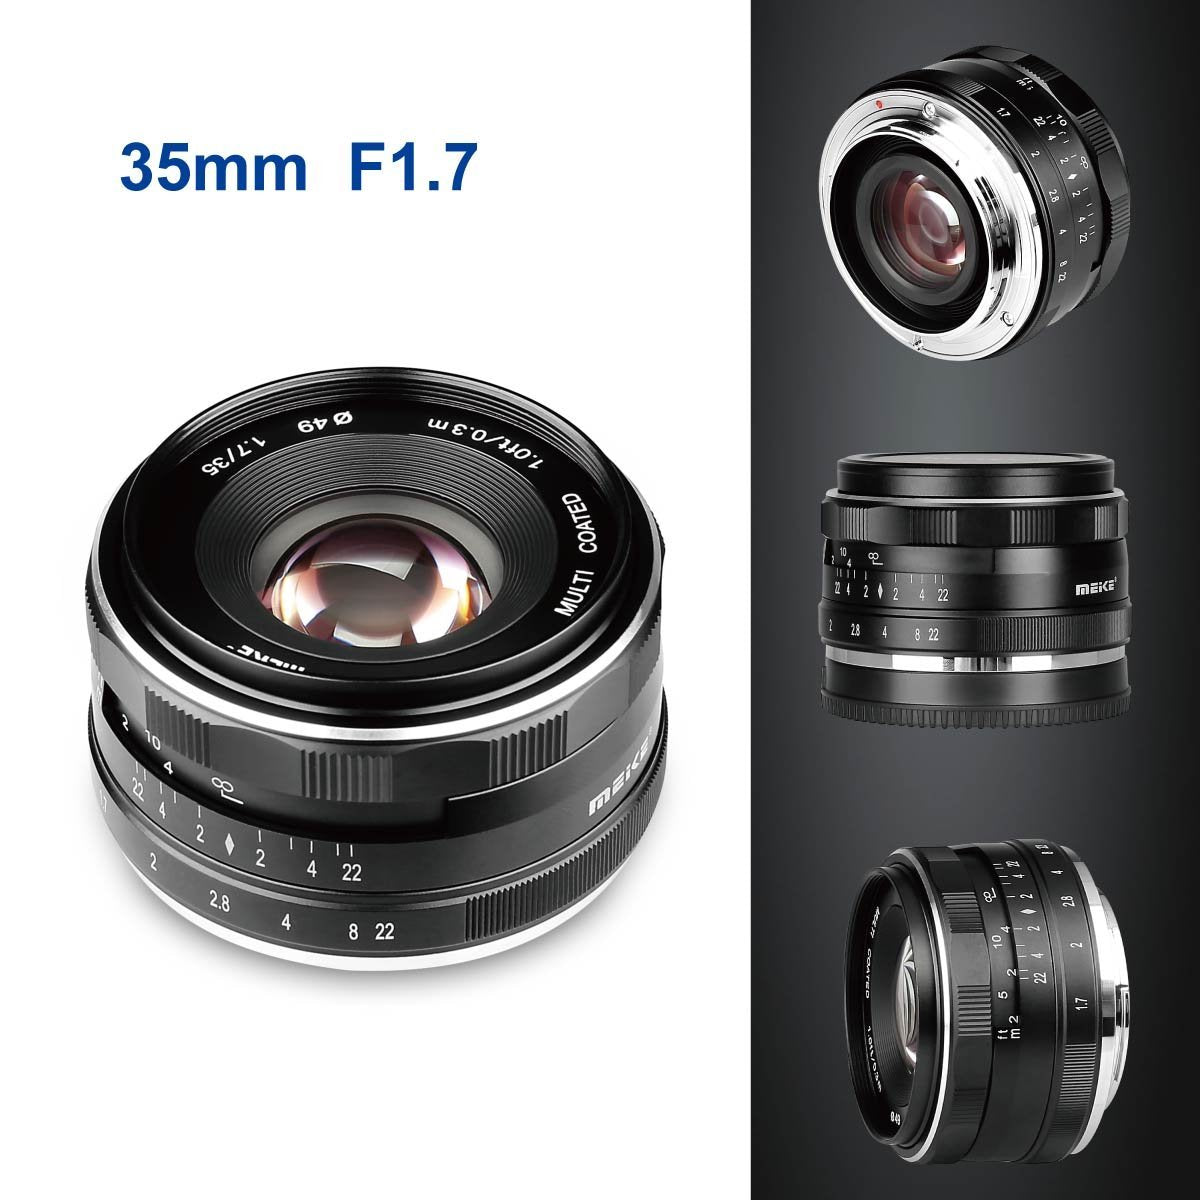 Meike MK-35mm 35mm F1.7 Large Aperture Manual Prime Fixed Lens APS-C for Sony E-Mount Digital Mirrorless Cameras NEX 3 NEX 3N NEX 5 NEX 5T NEX 5R NEX 6 7 A5000, A5100, A6000, A6100,A6300 A6500 A9